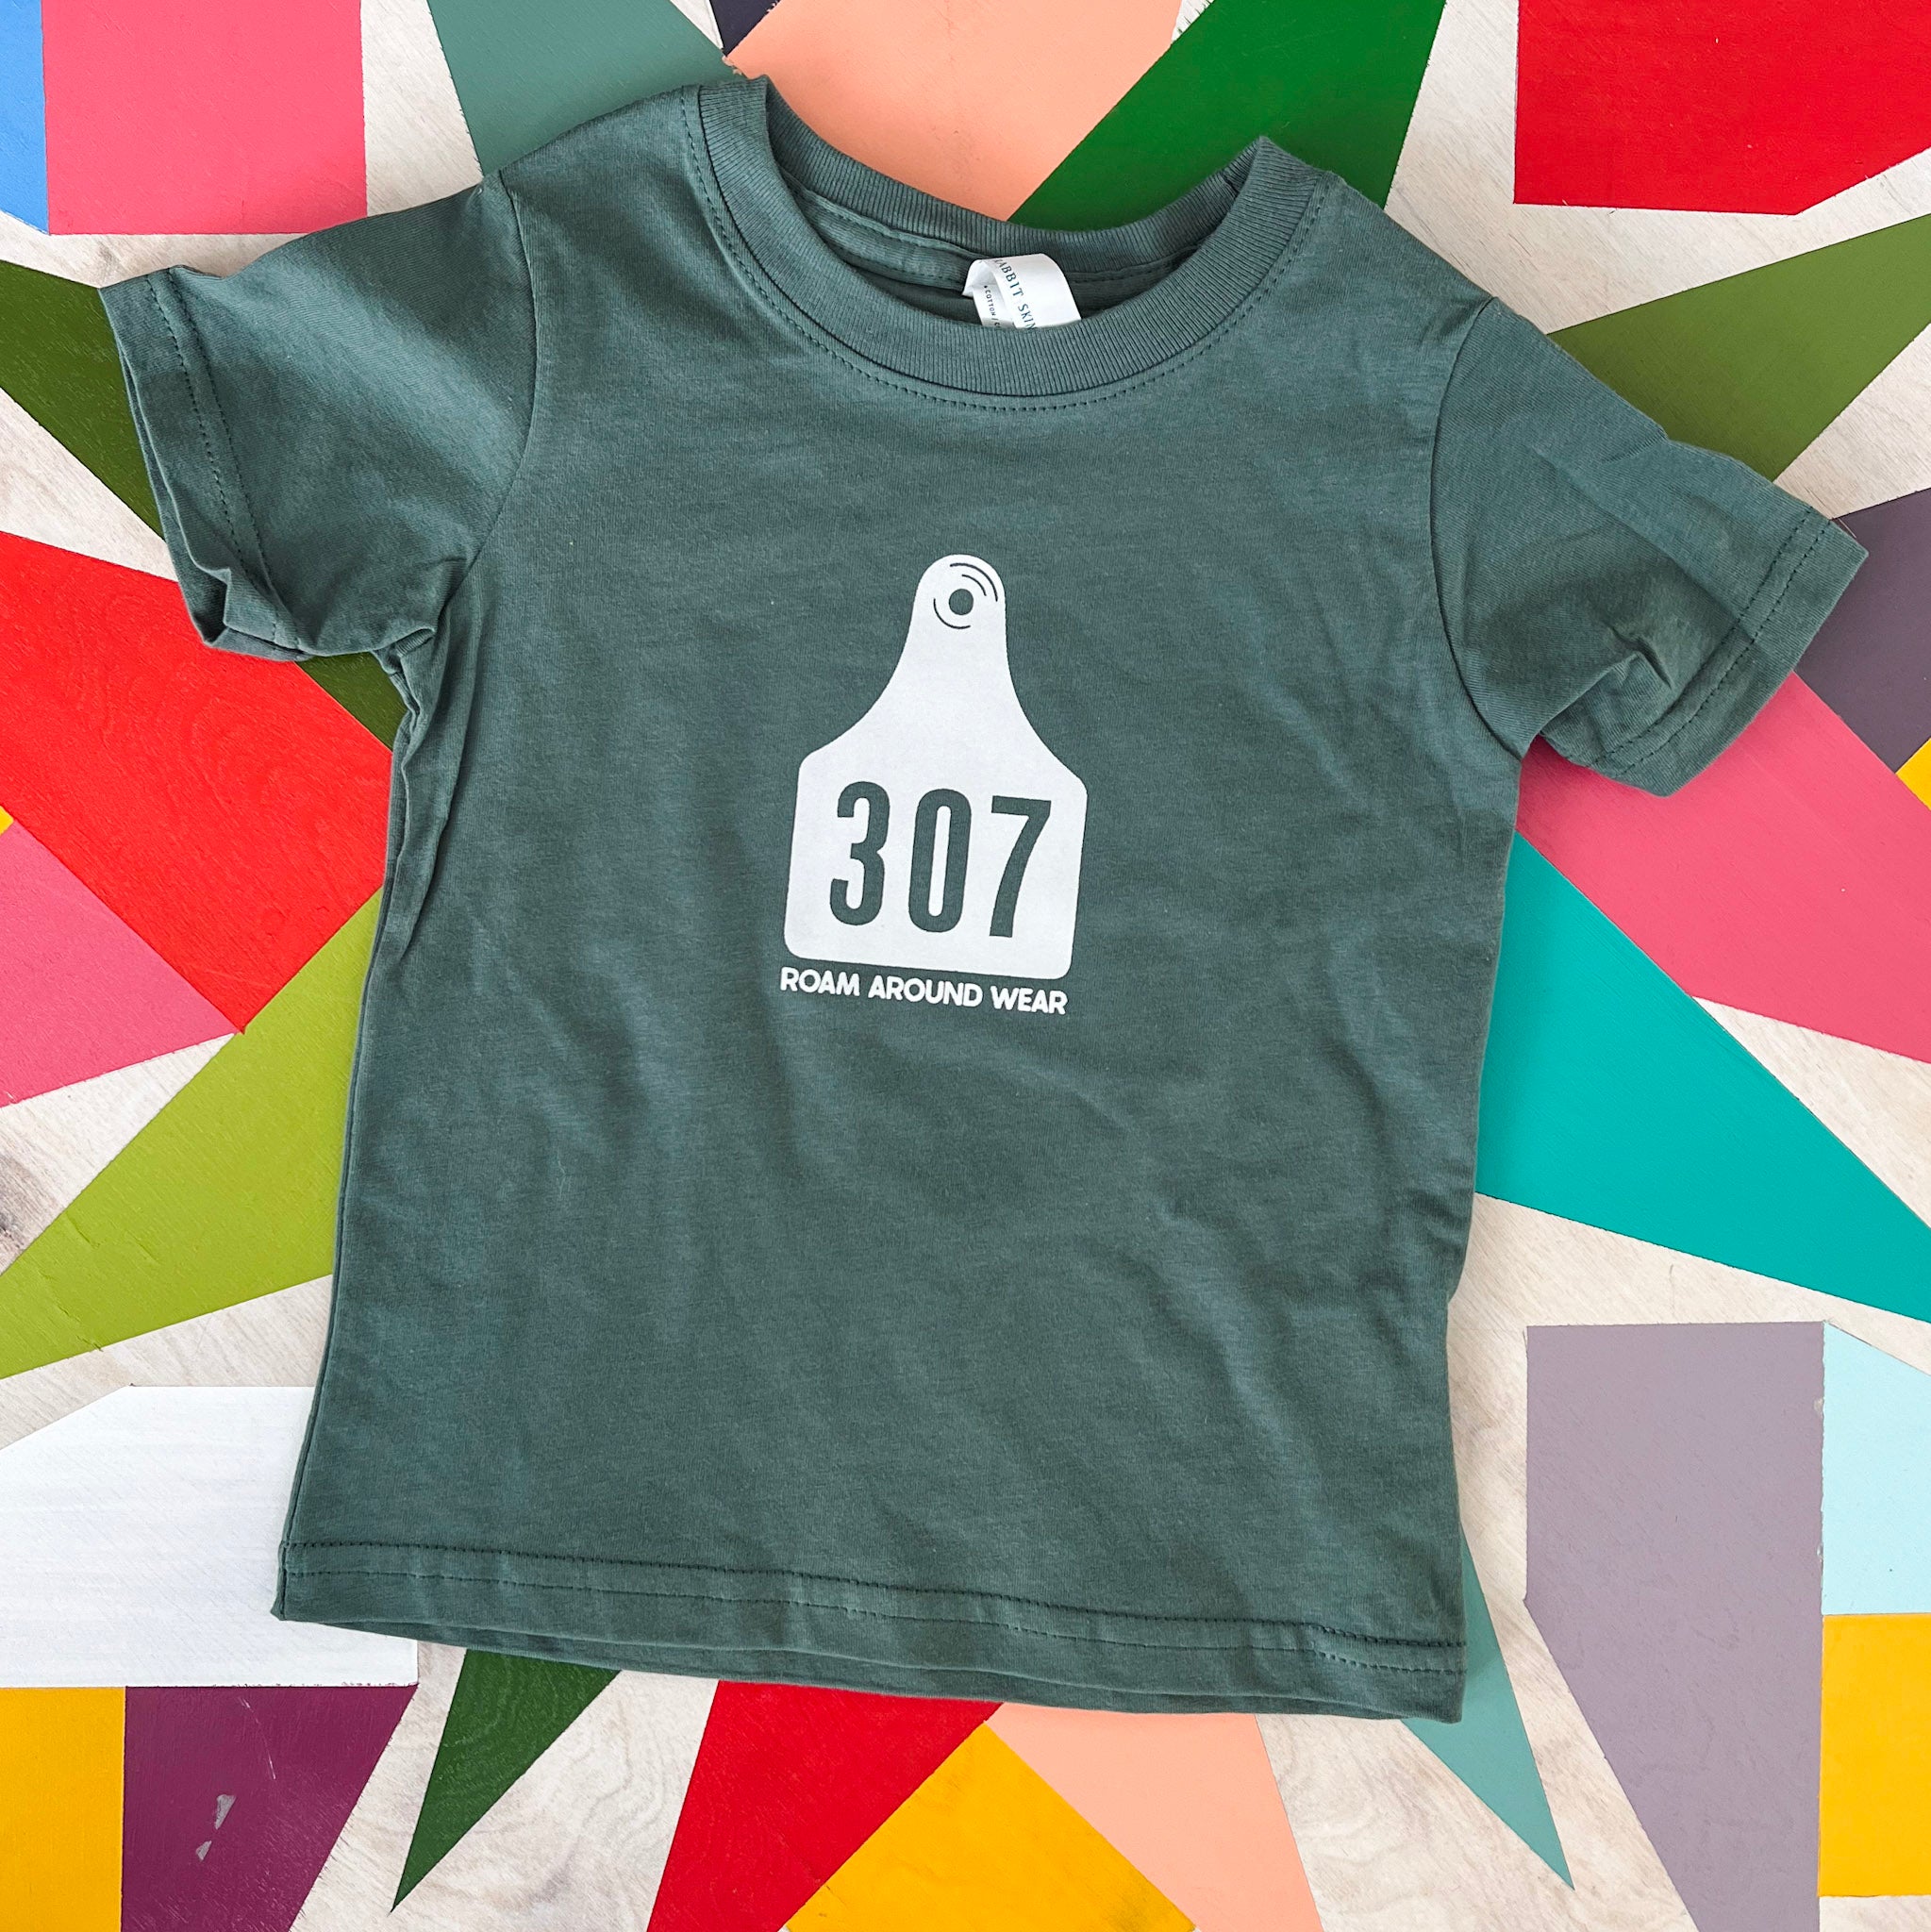 Green Toddler 307 Tee. Wyoming Cow Tag Toddler Shirt. Roam Around Wear is a Wyoming t-shirt company based out of Gillette, Wyoming